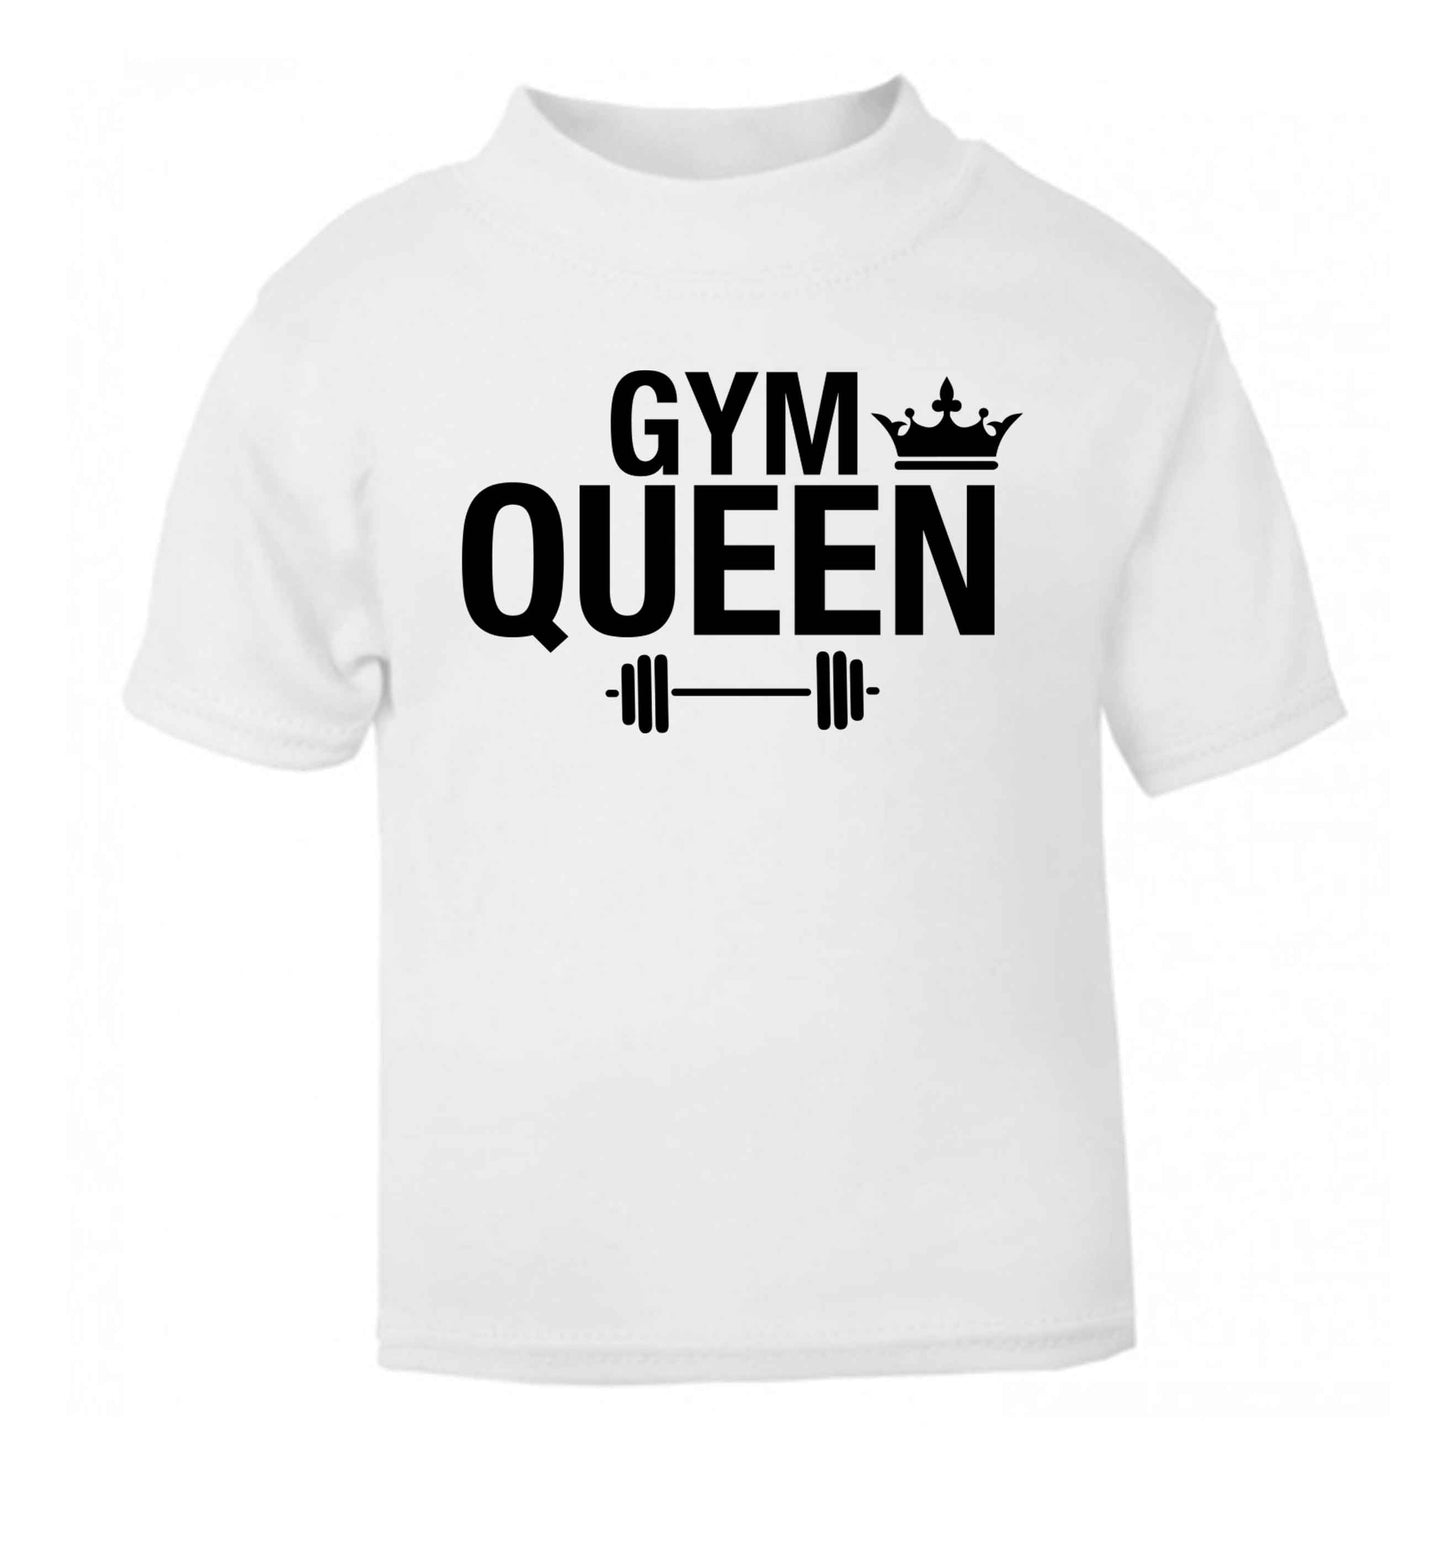 Gym queen white Baby Toddler Tshirt 2 Years